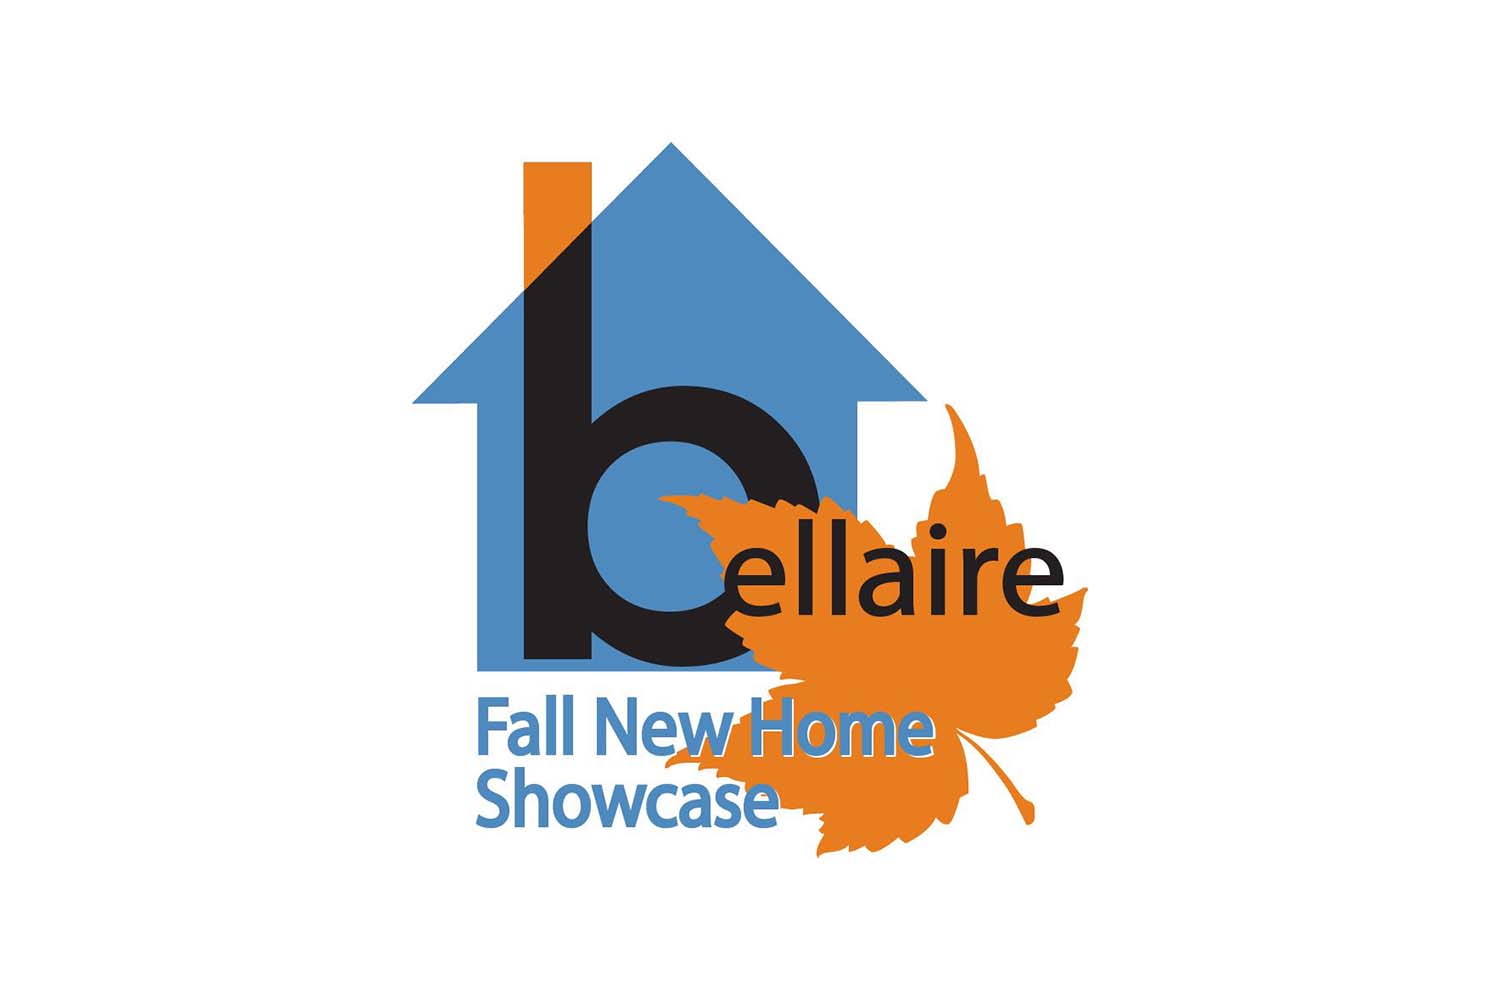 Bellaire Fall New Home Showcase Awards